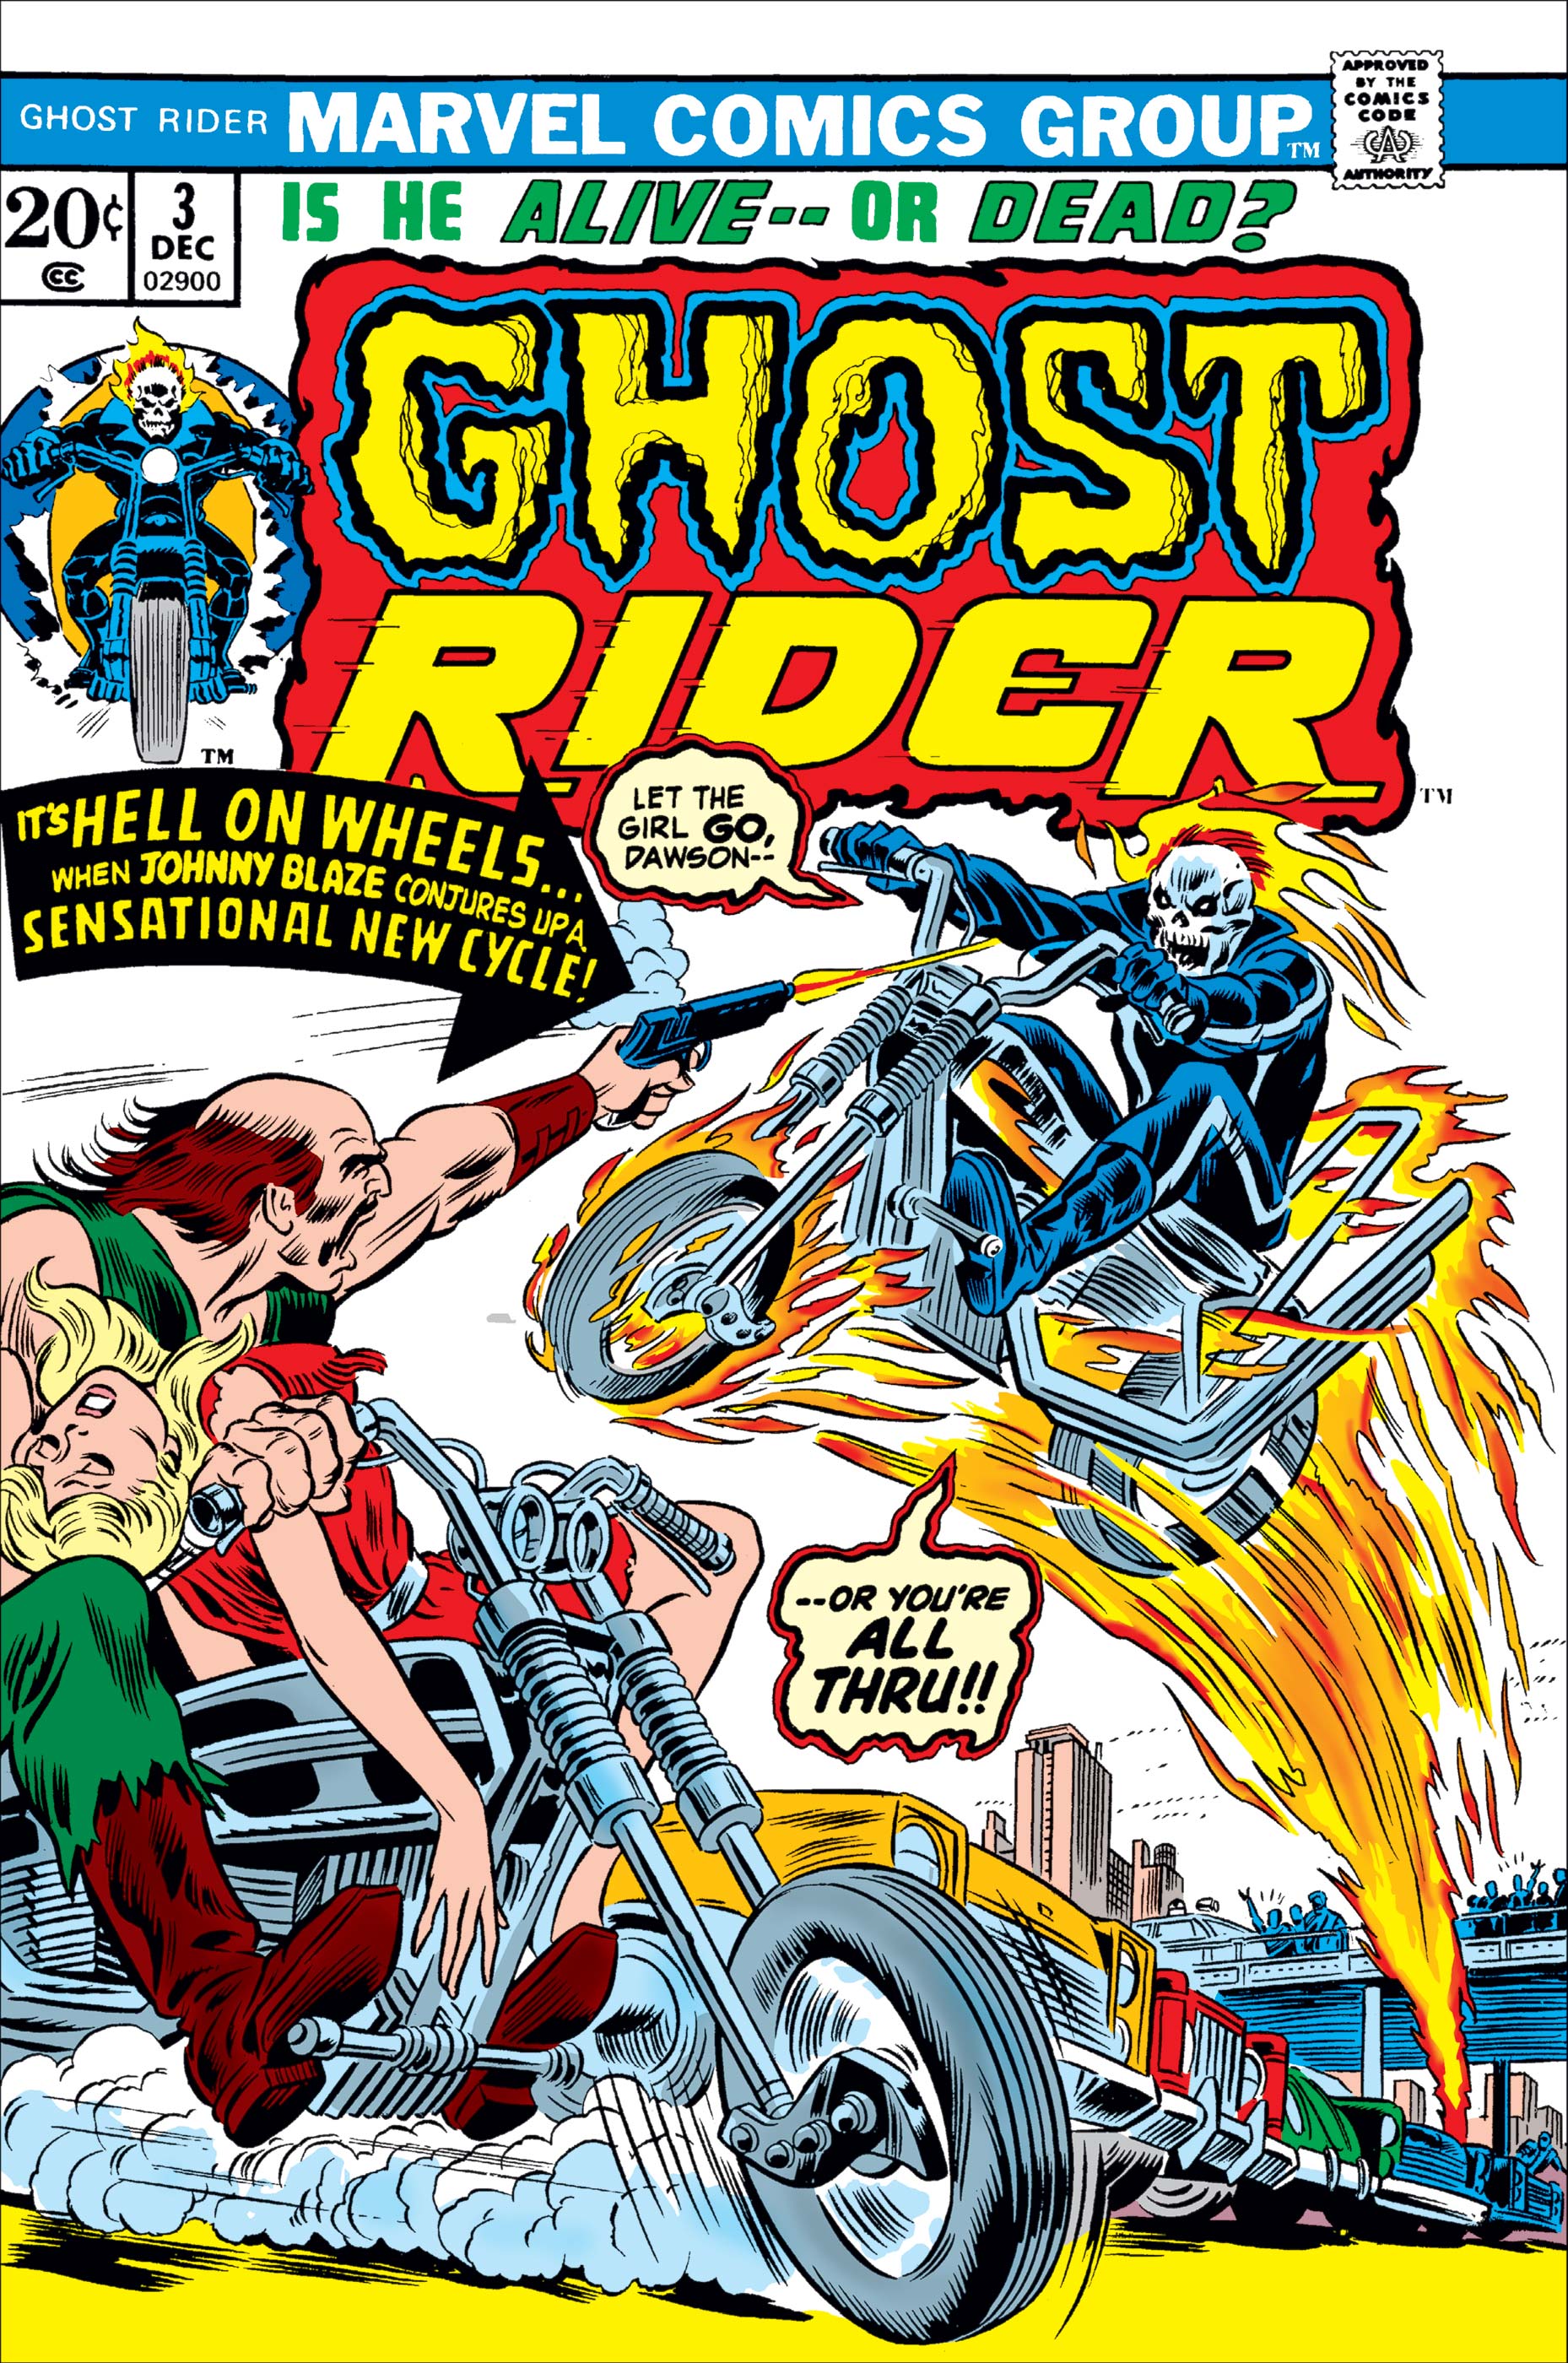 Ghost Rider (1973) #3 | Comic Issues | Marvel